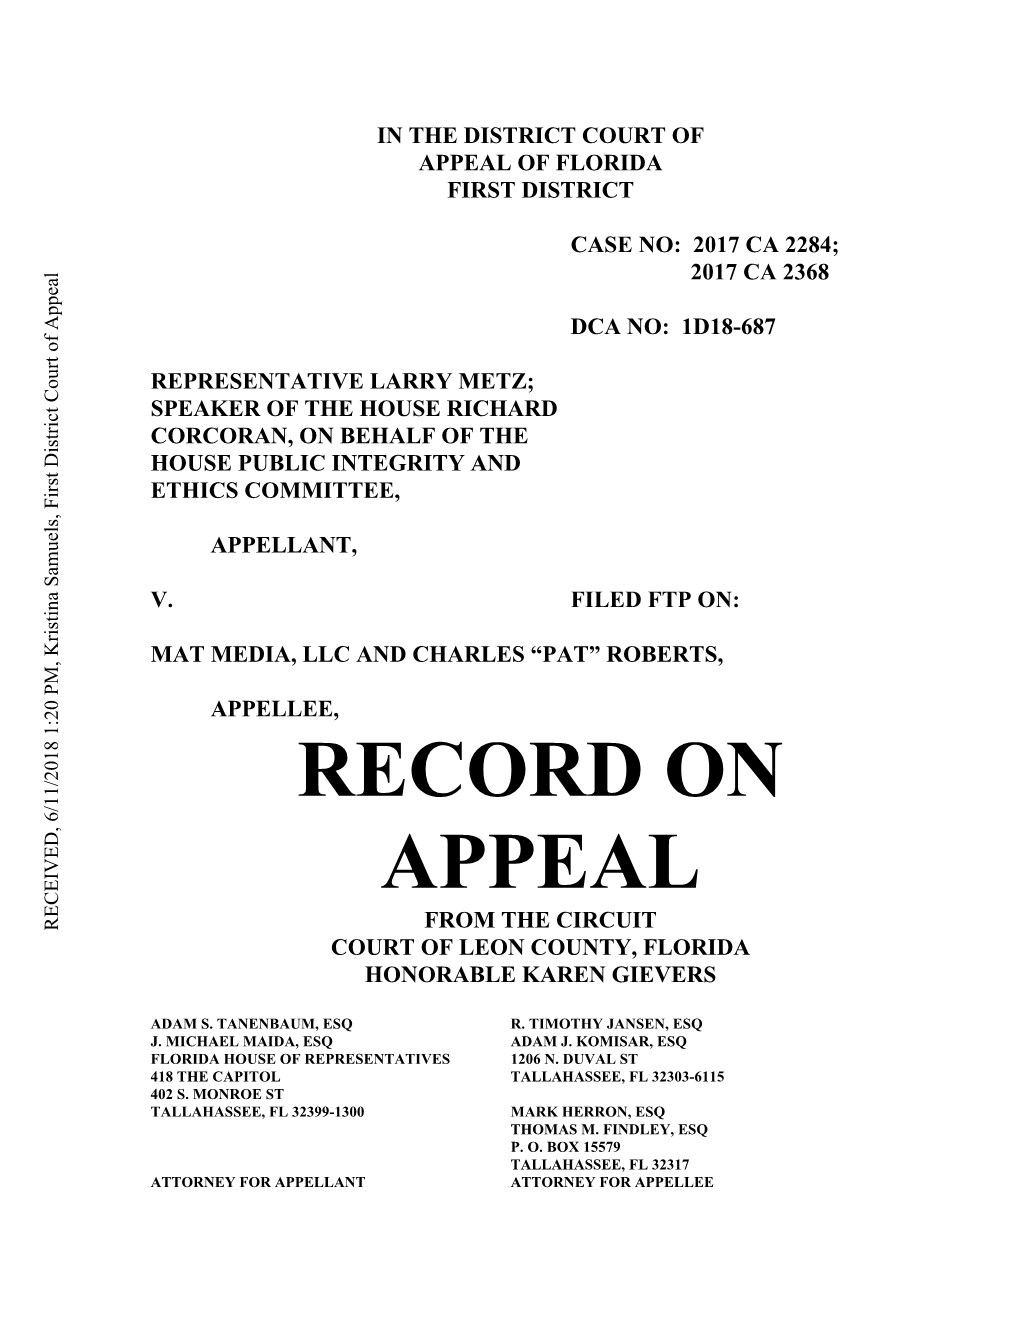 Record on Appeal in the Above-Referenced Consolidated Cases to Include the Following